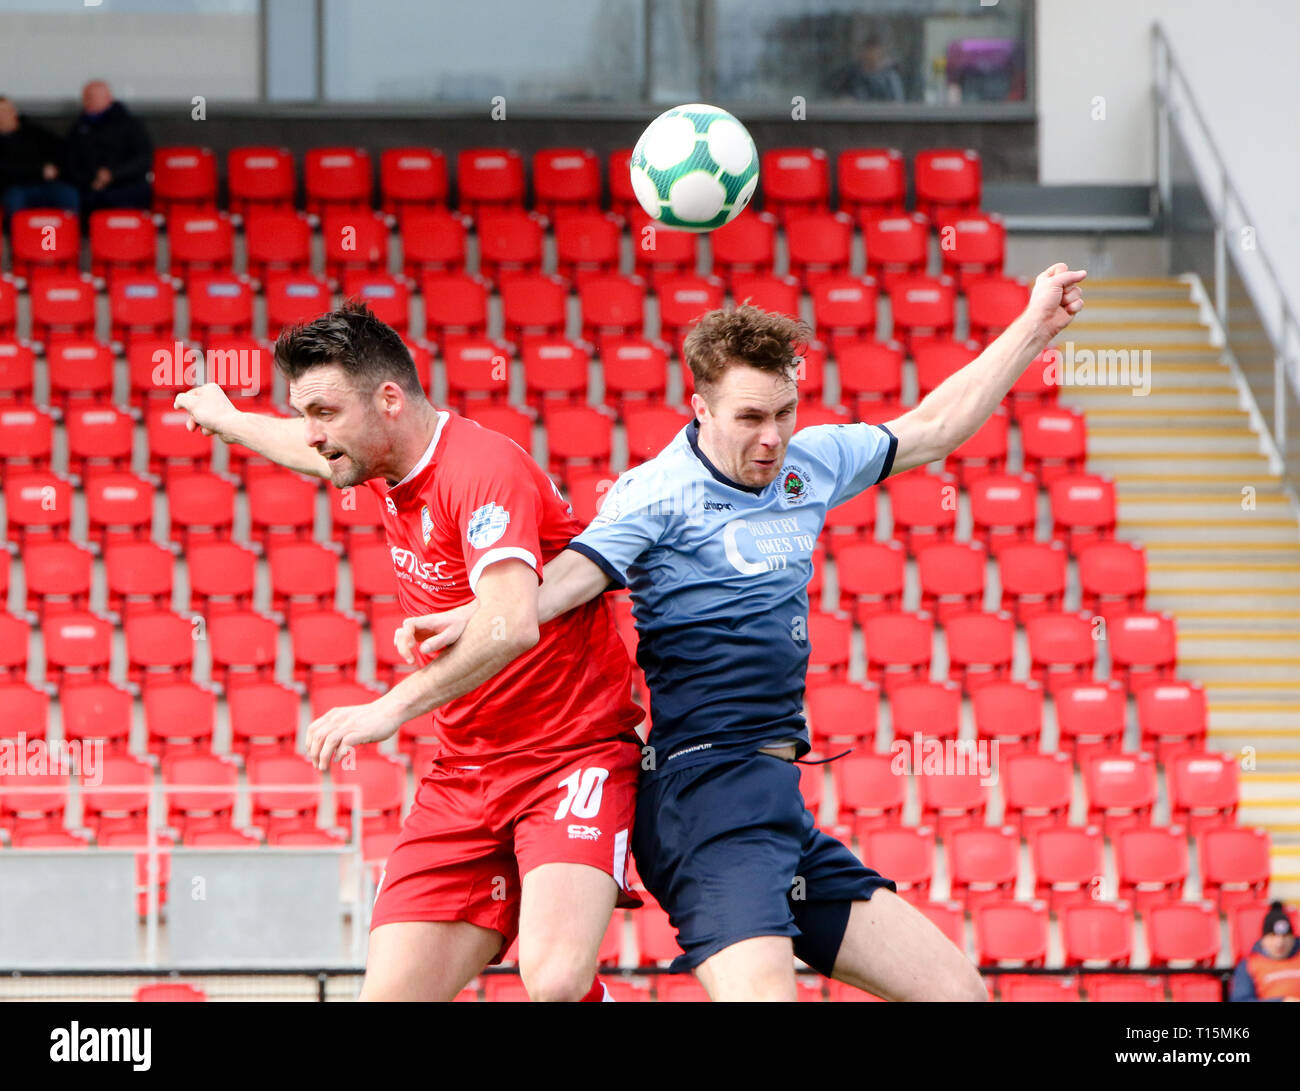 Derry, Northern Ireland, UK. Eoin Bradley (Coleraine) & Colm McLaughlin (Institute) an an ariel dual during the Danske Bank Premiership fixture between Institute FC & Coleraine FC at the Ryan McBride Brandywell Stadium 23-03-2019 Credit: Kevin Moore/mci/Alamy Live News Stock Photo